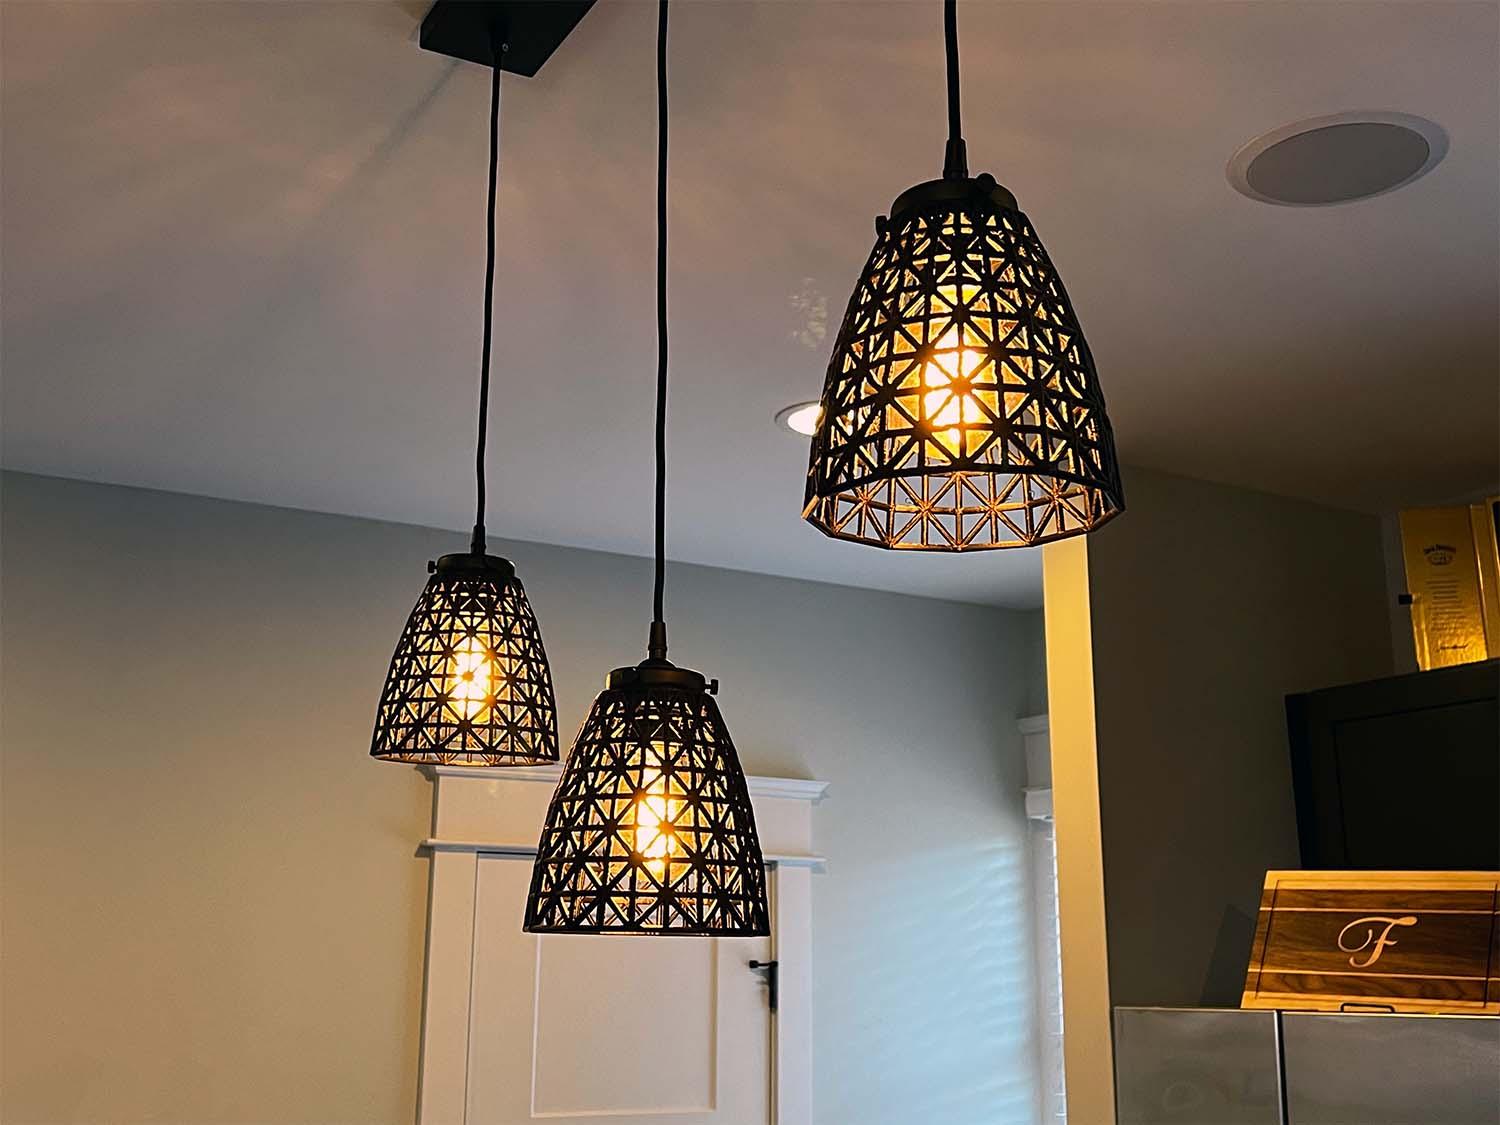 Cylindrical Lattice Lamp Shades for E26 or E27 - 3D pendant light fixture with cylindrical IsoTruss shades - 3d model